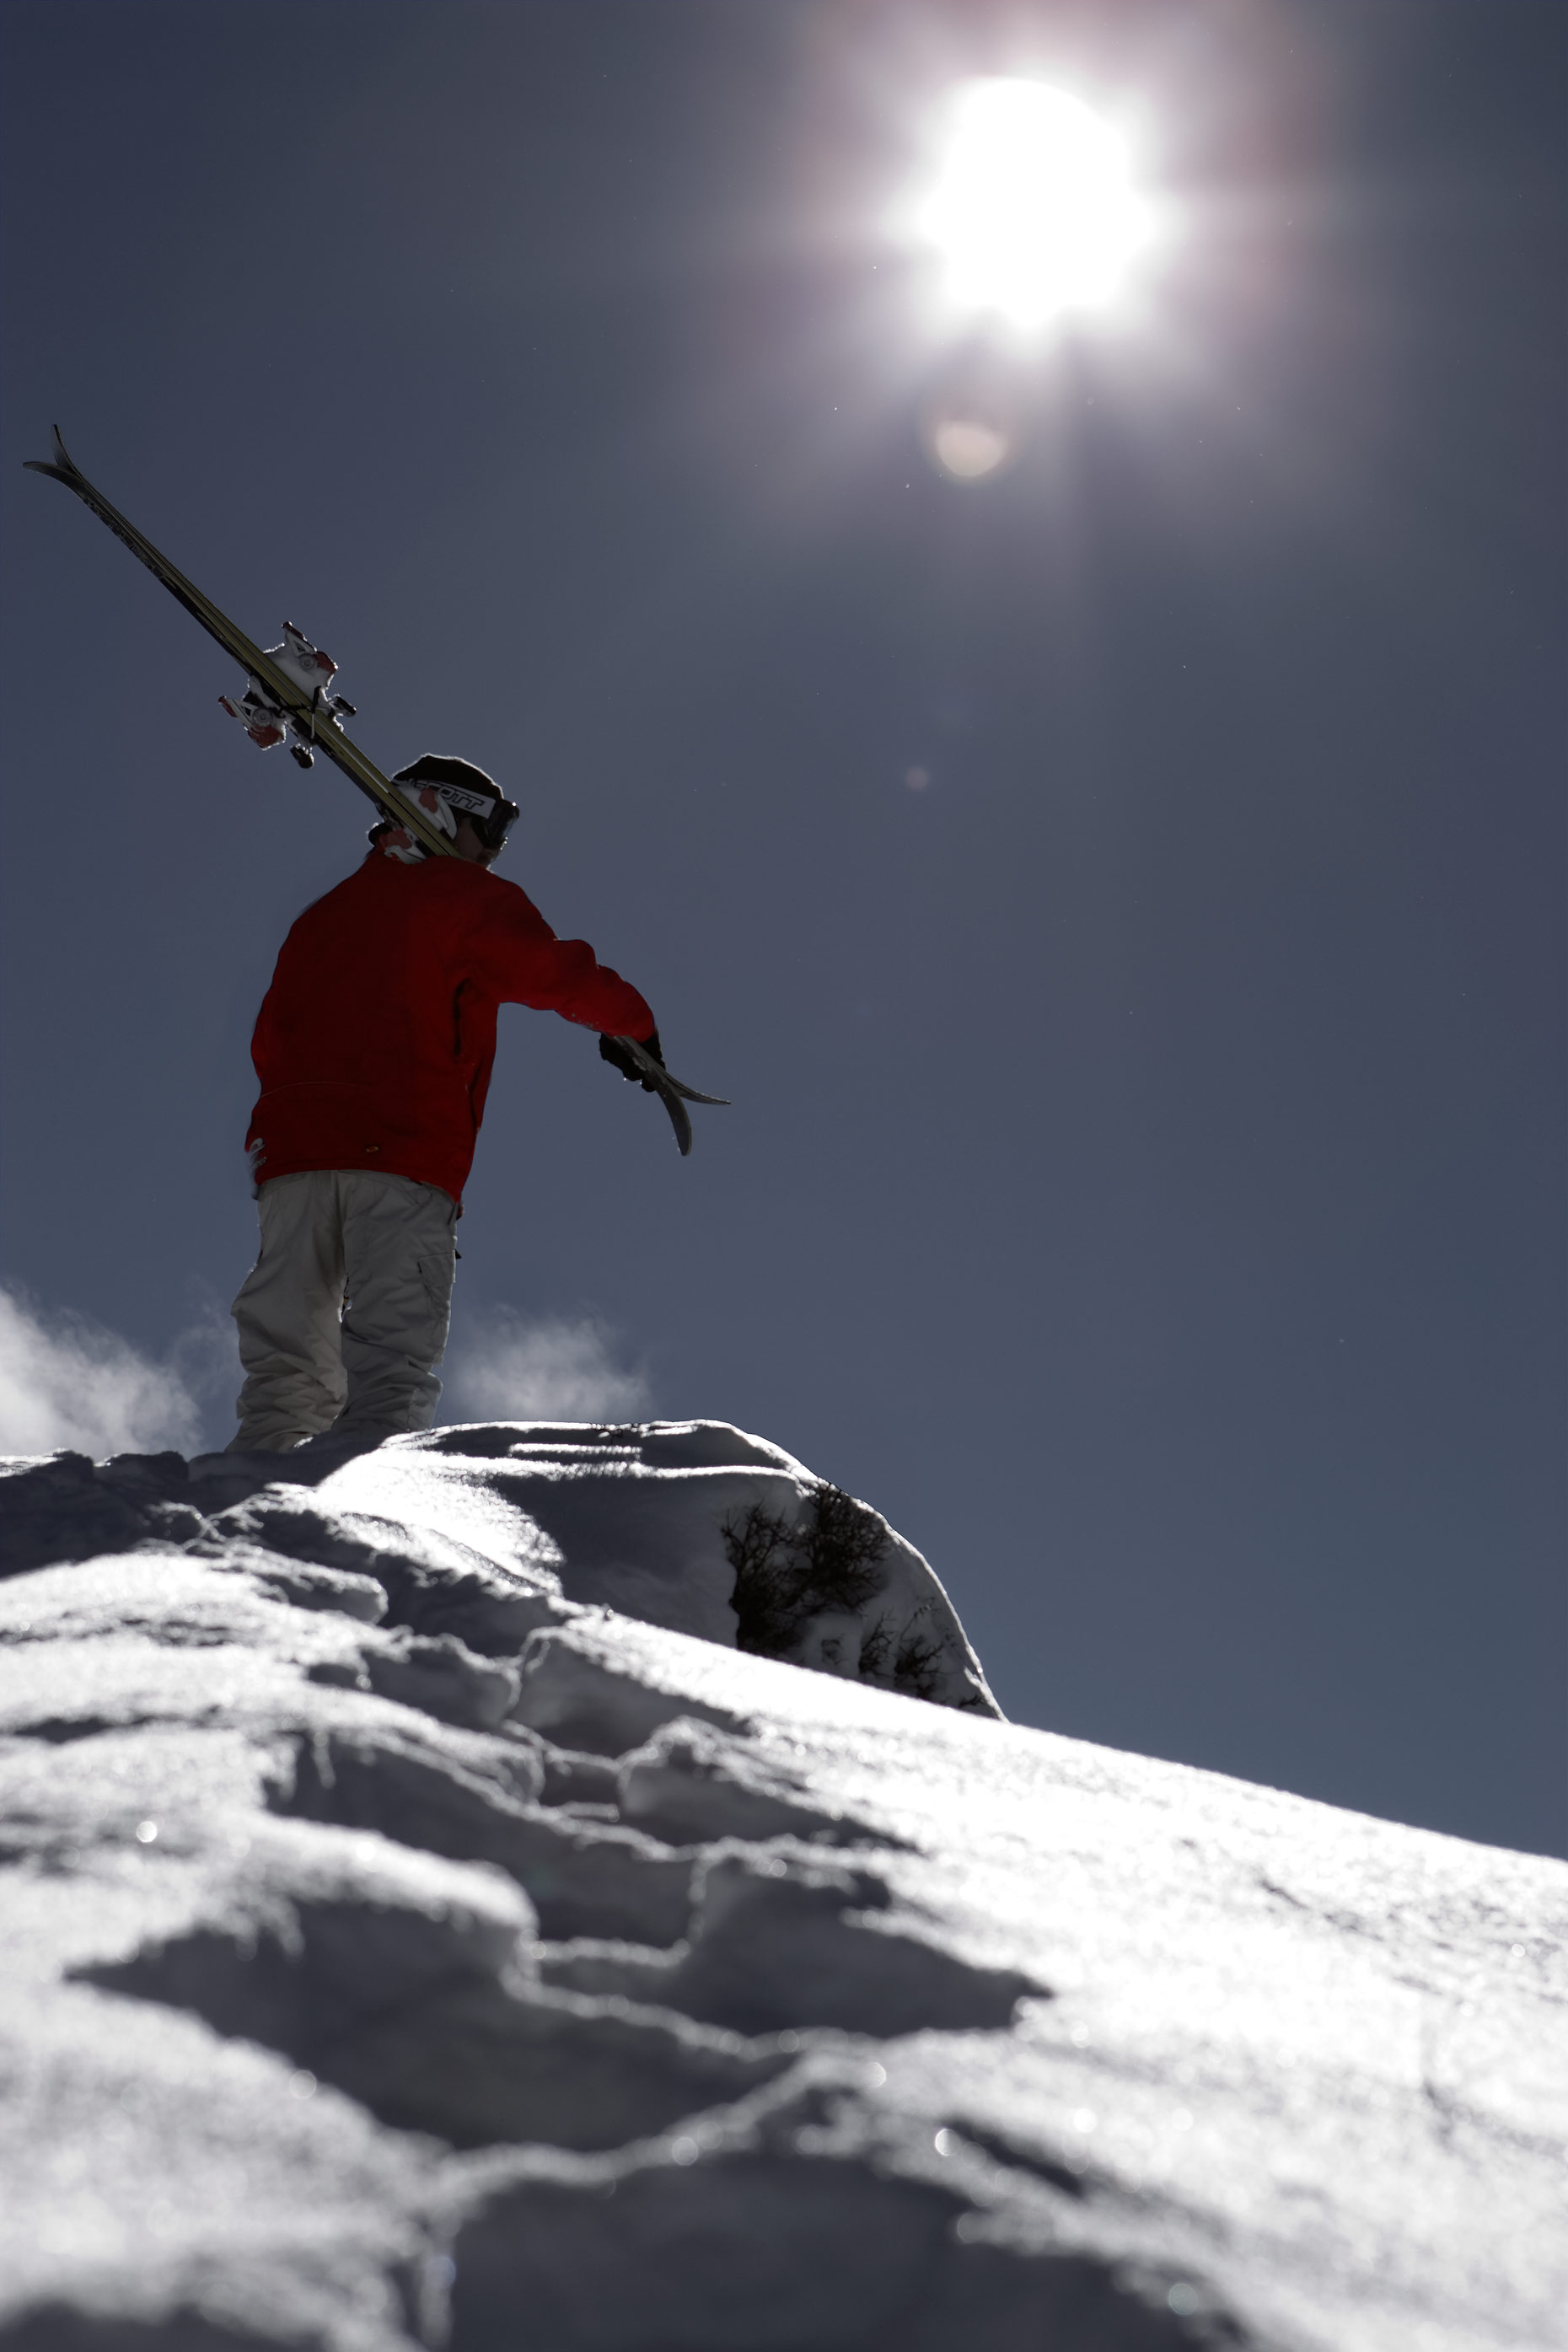 Tomas Zuccareno Photography | Hiking with skis